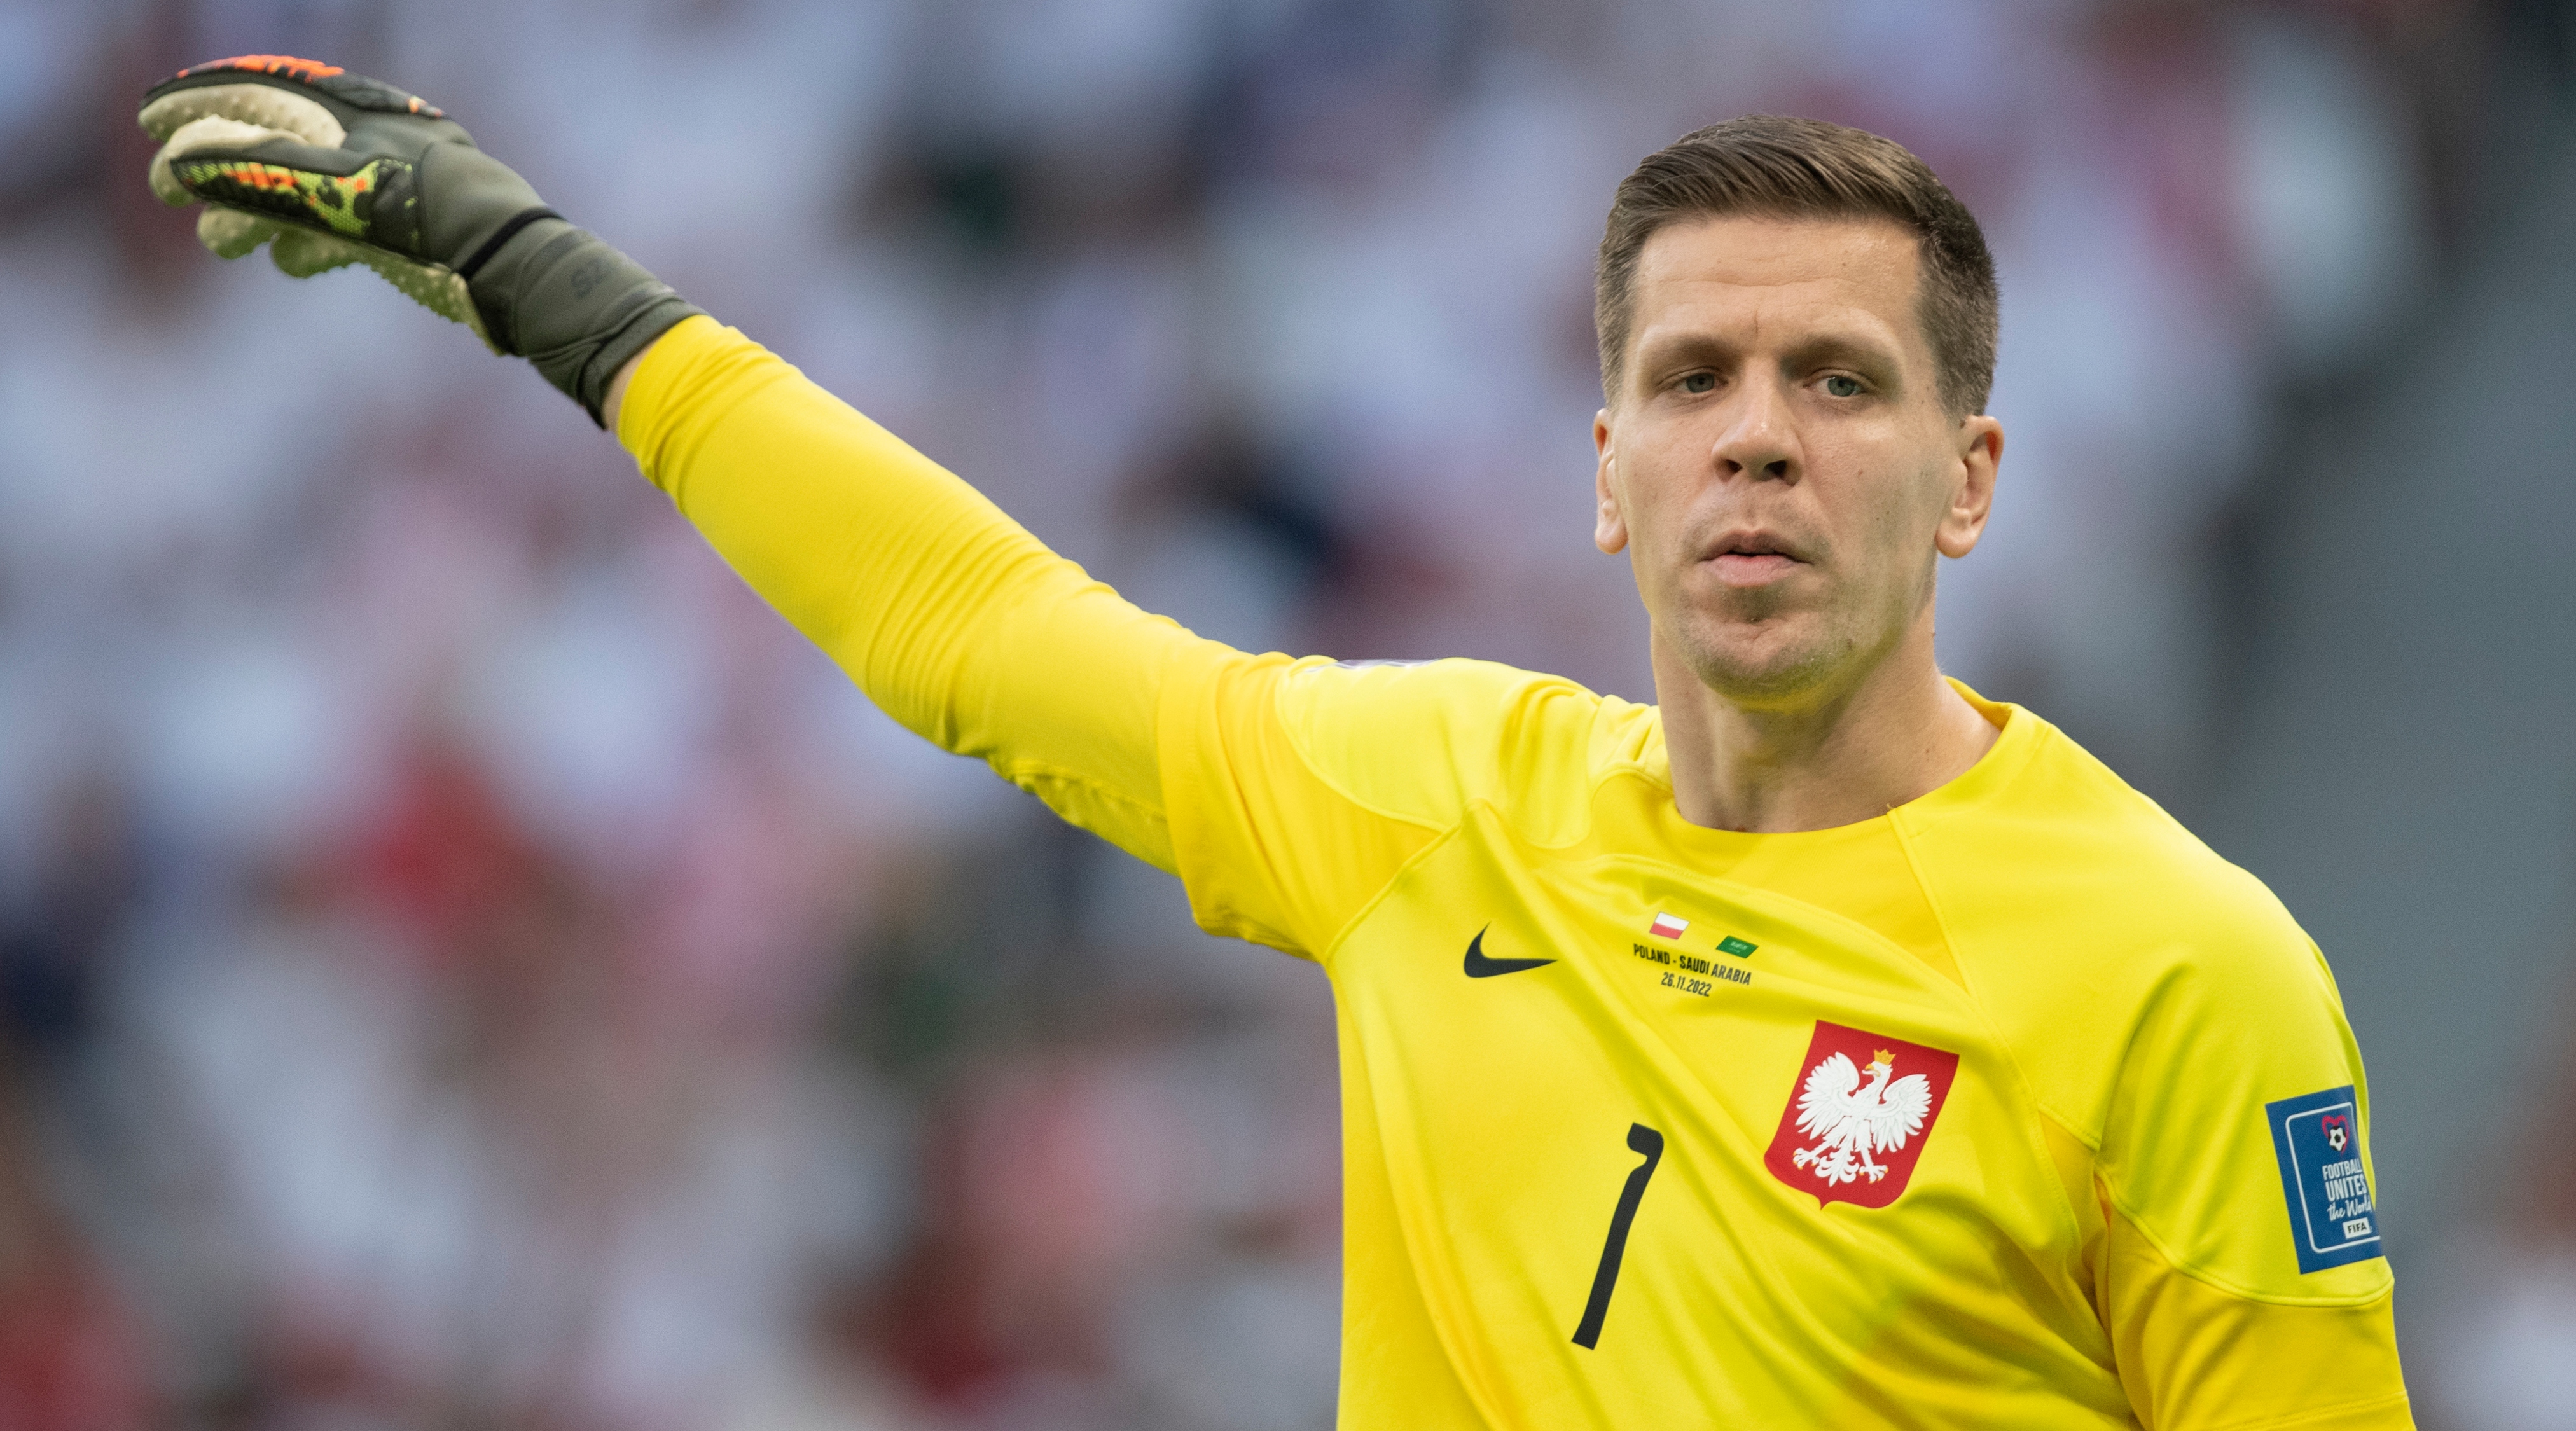 Wojciech Szczesny of Poland gestures during the FIFA World Cup 2022 group stage match between Poland and Saudi Arabia at the Education City Stadium on November 26, 2022 in Al Rayyan, Qatar.